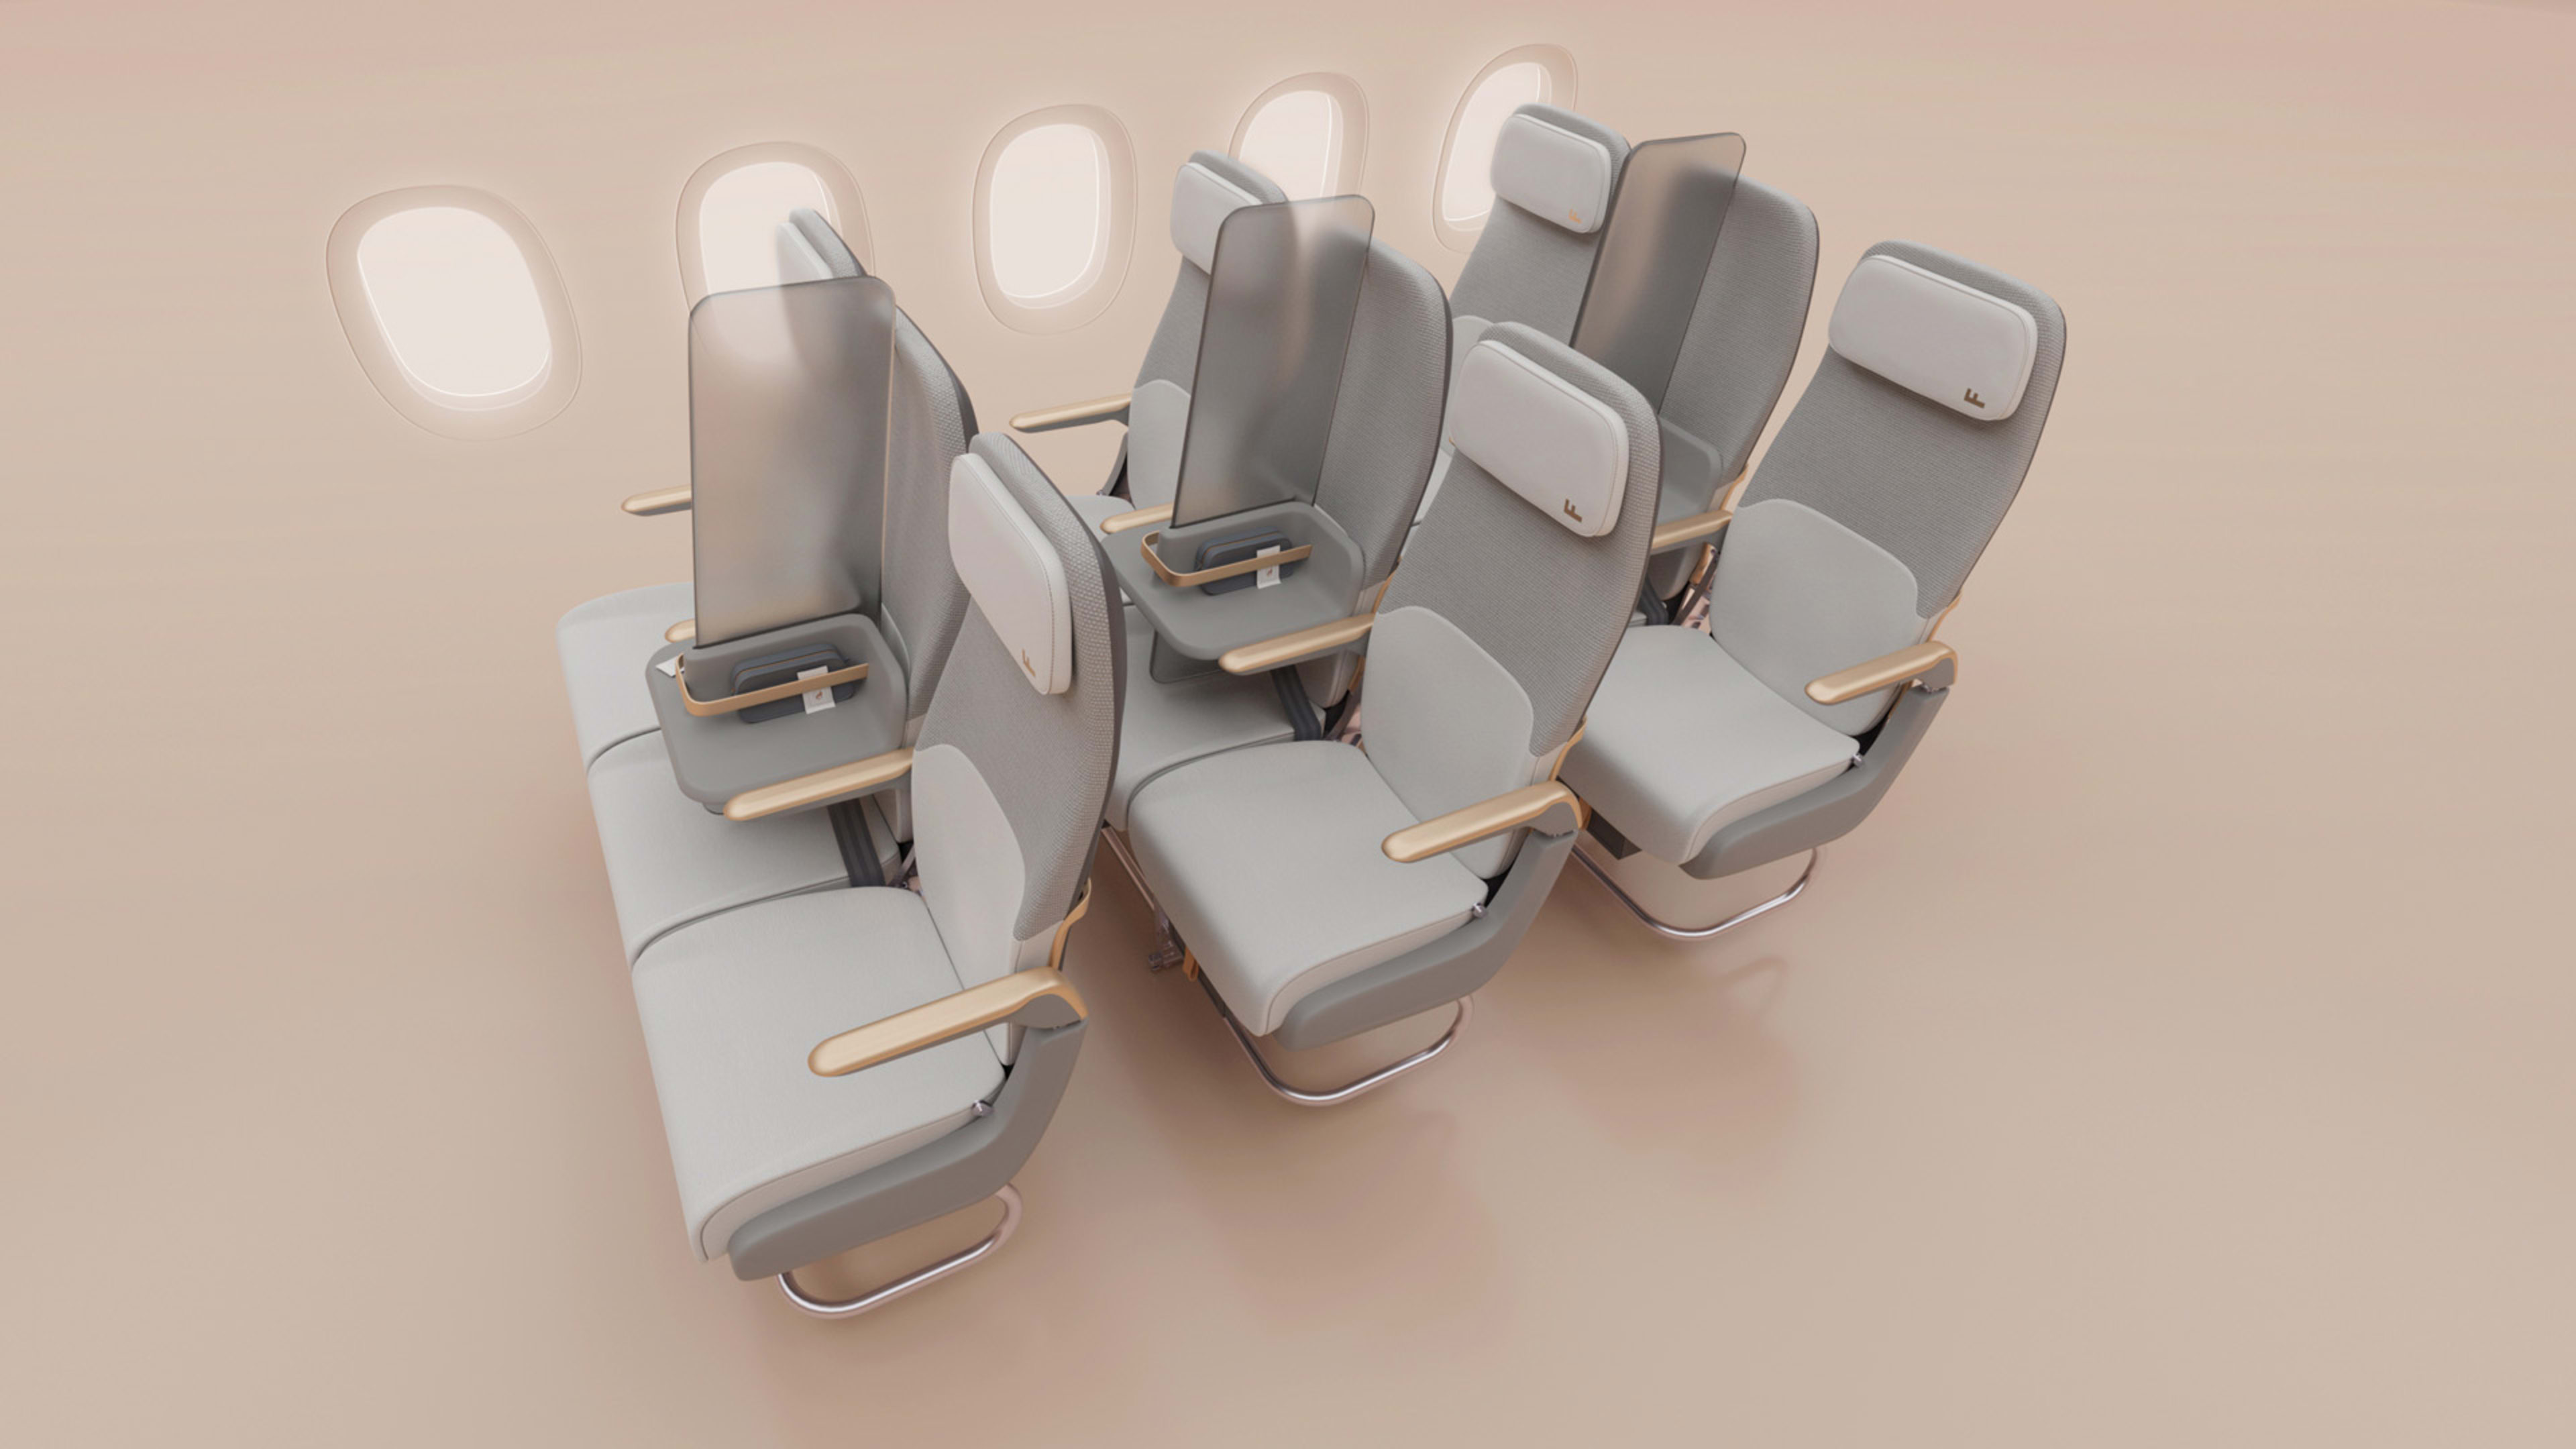 Designers turn an airplane’s middle seat into a COVID-19 sneeze guard